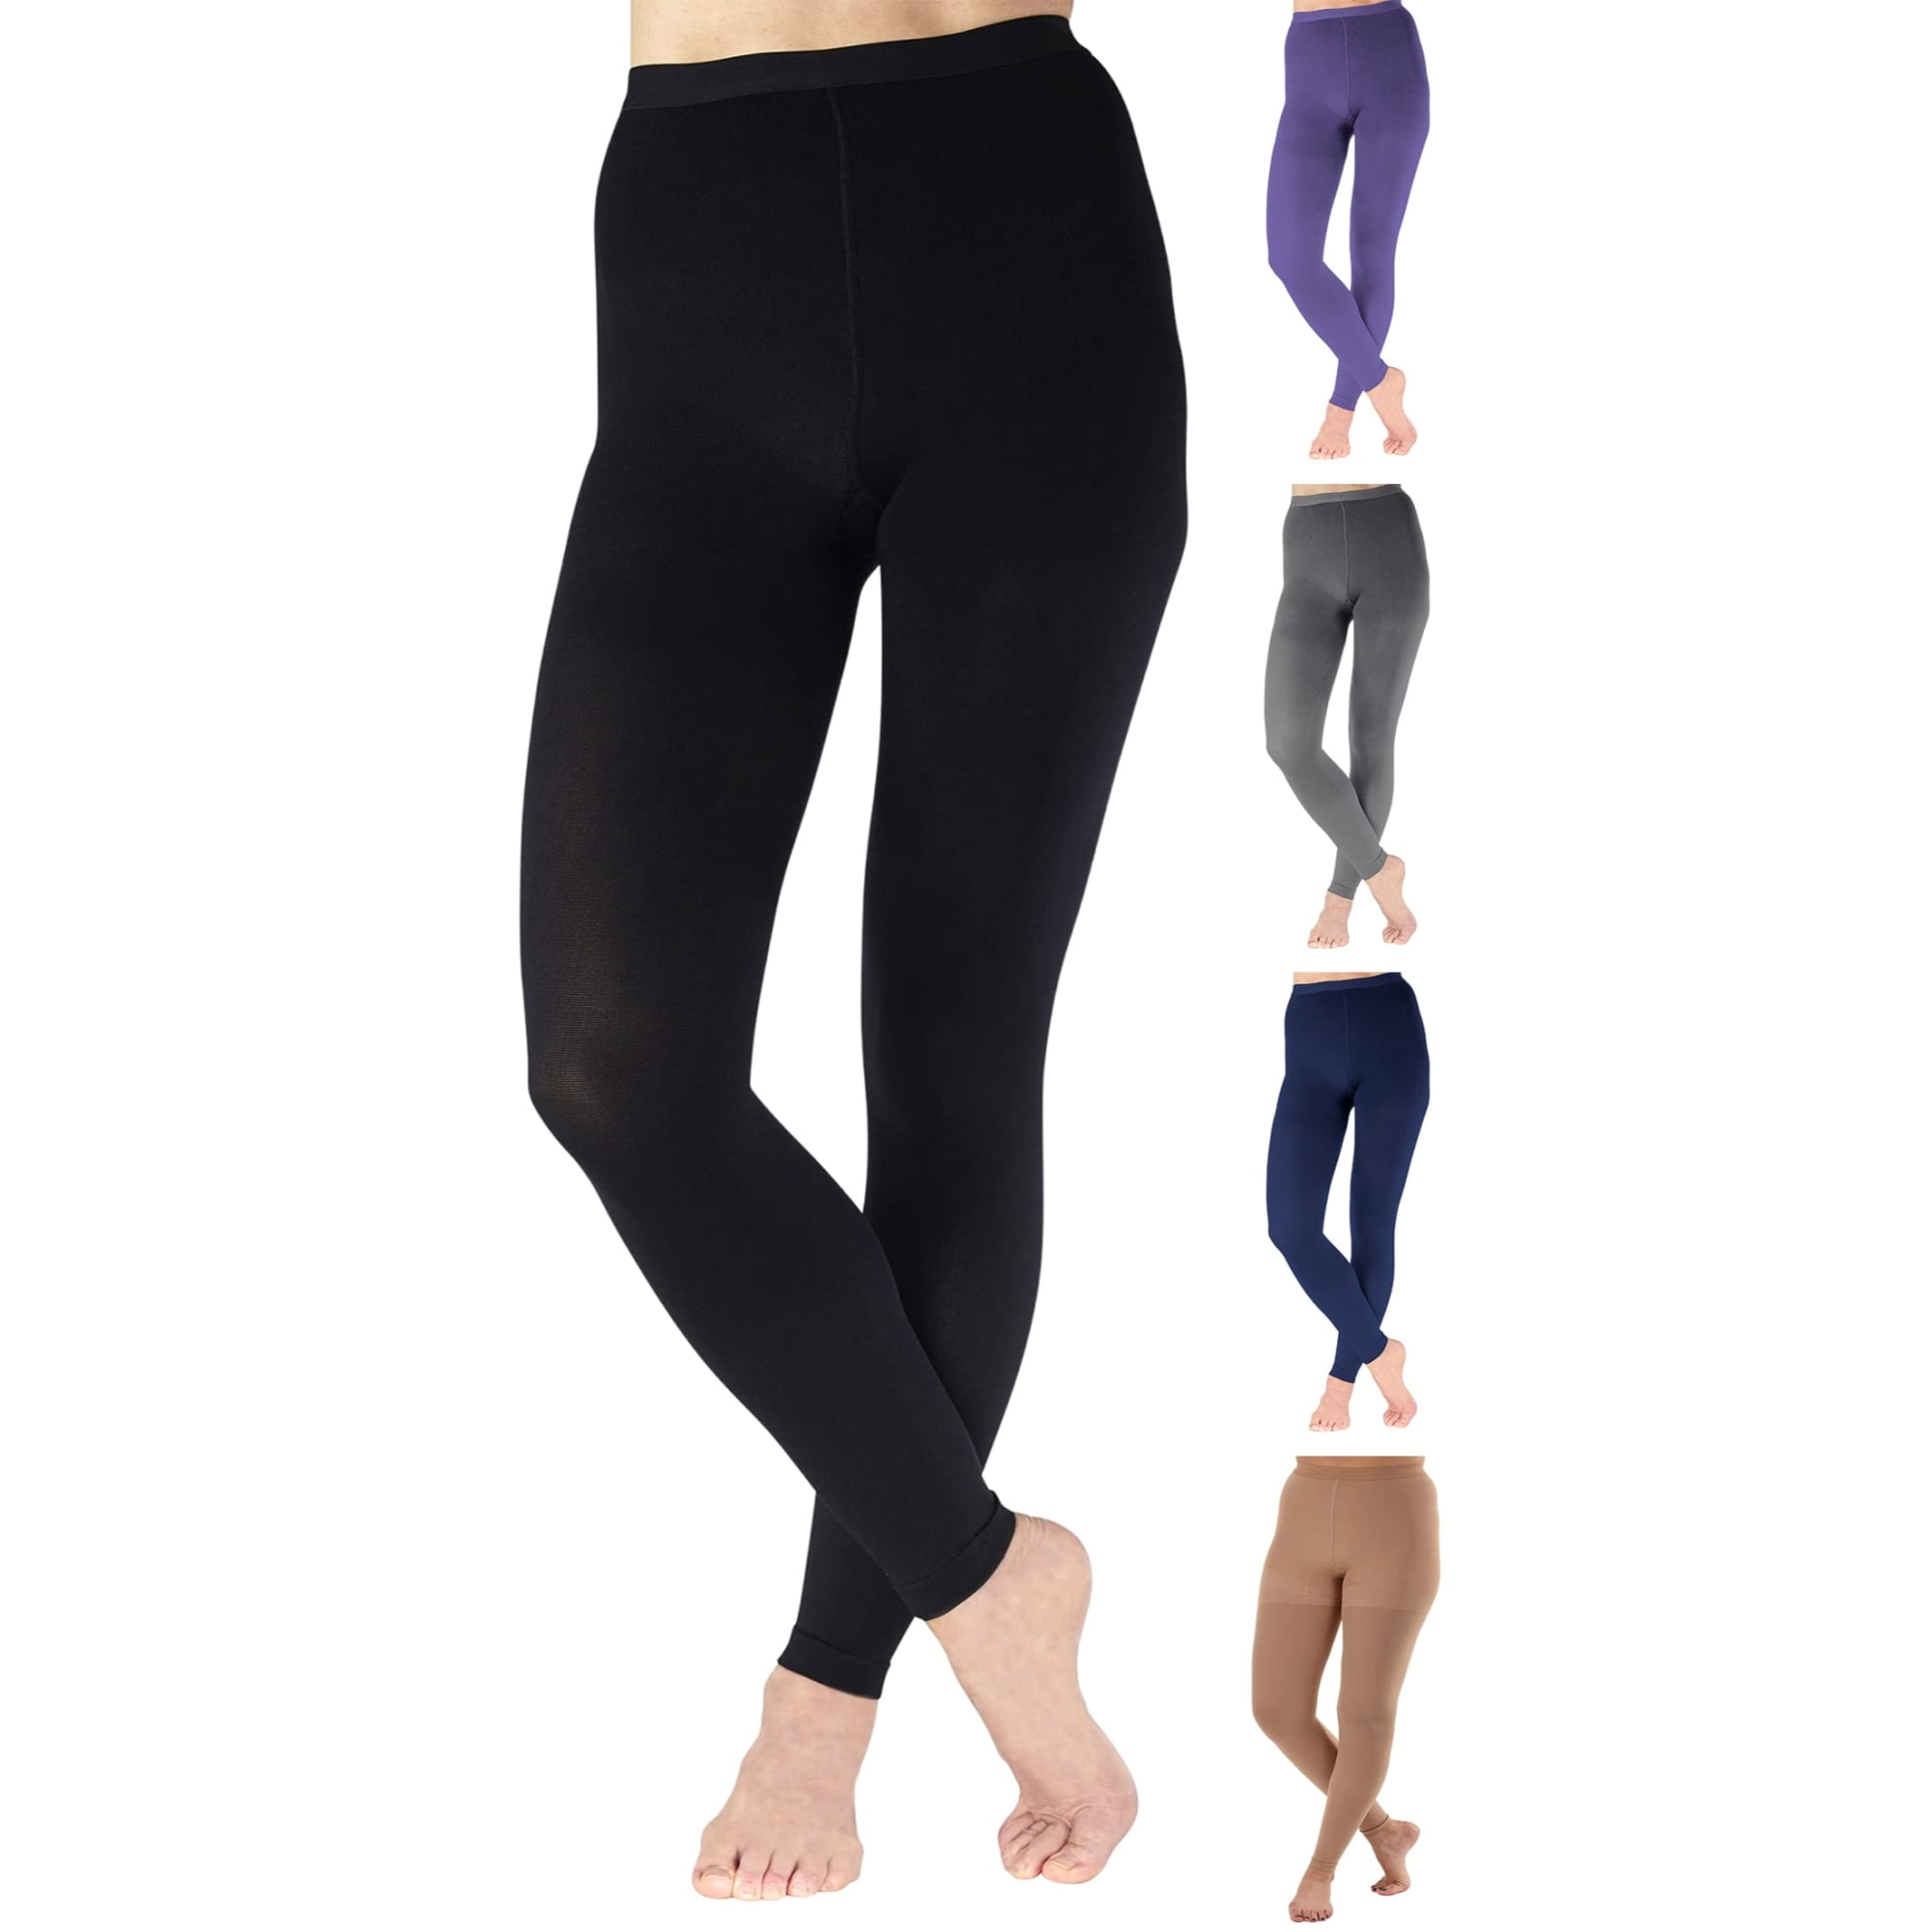 4XL Extra Wide Compression Leggings for Women 20-30mmHg - Black, 4X-Large 